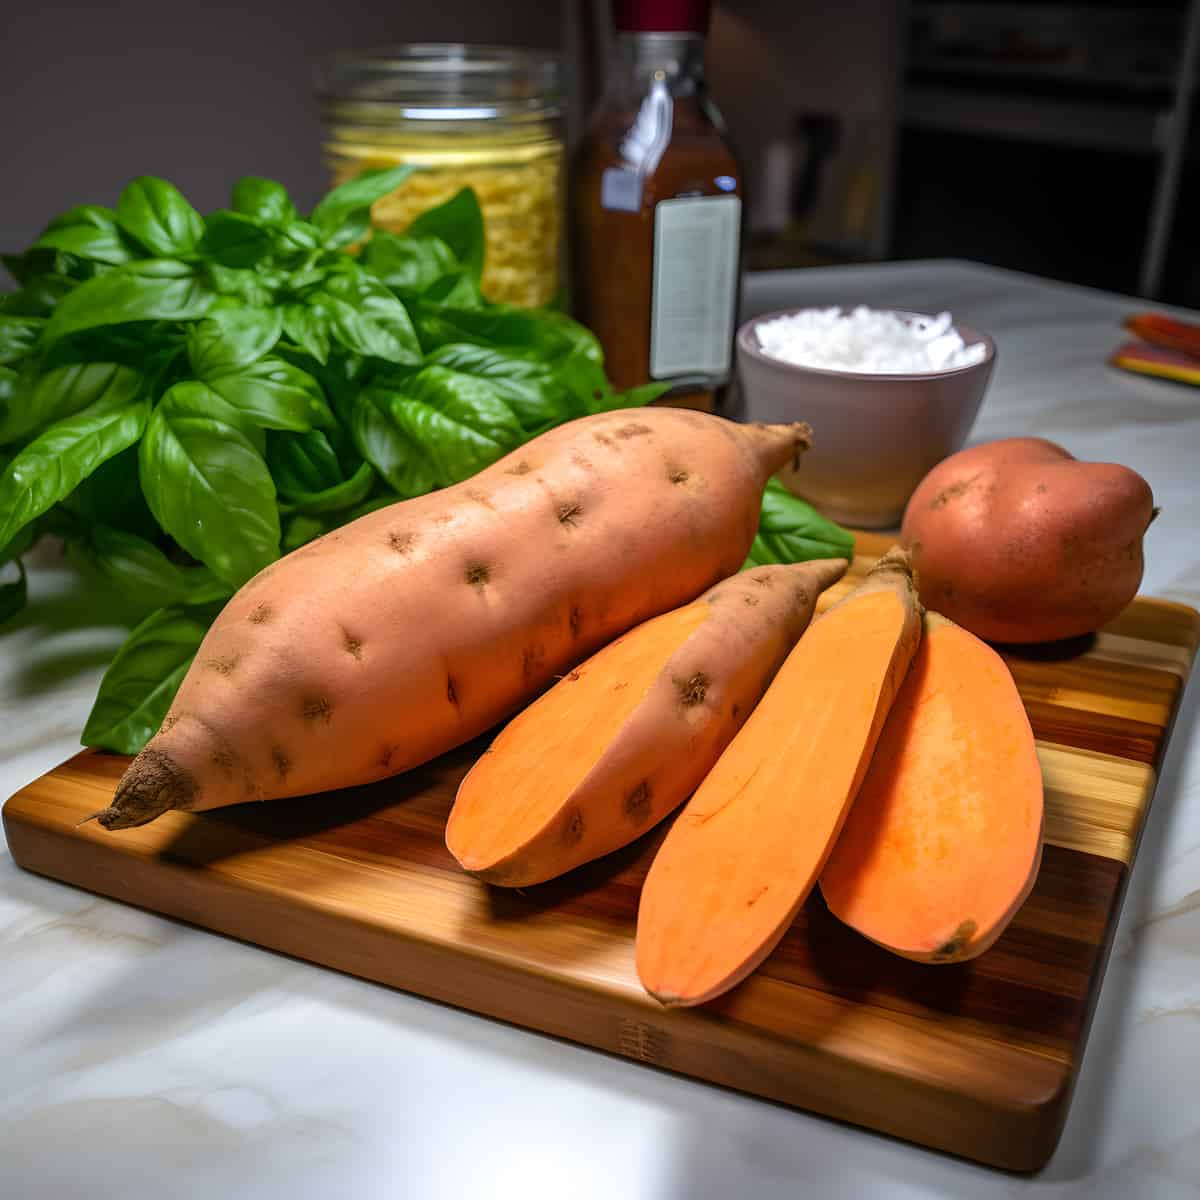 Porto Rico Or Porto Rican Or Puerto Rican Sweet Potatoes on a kitchen counter